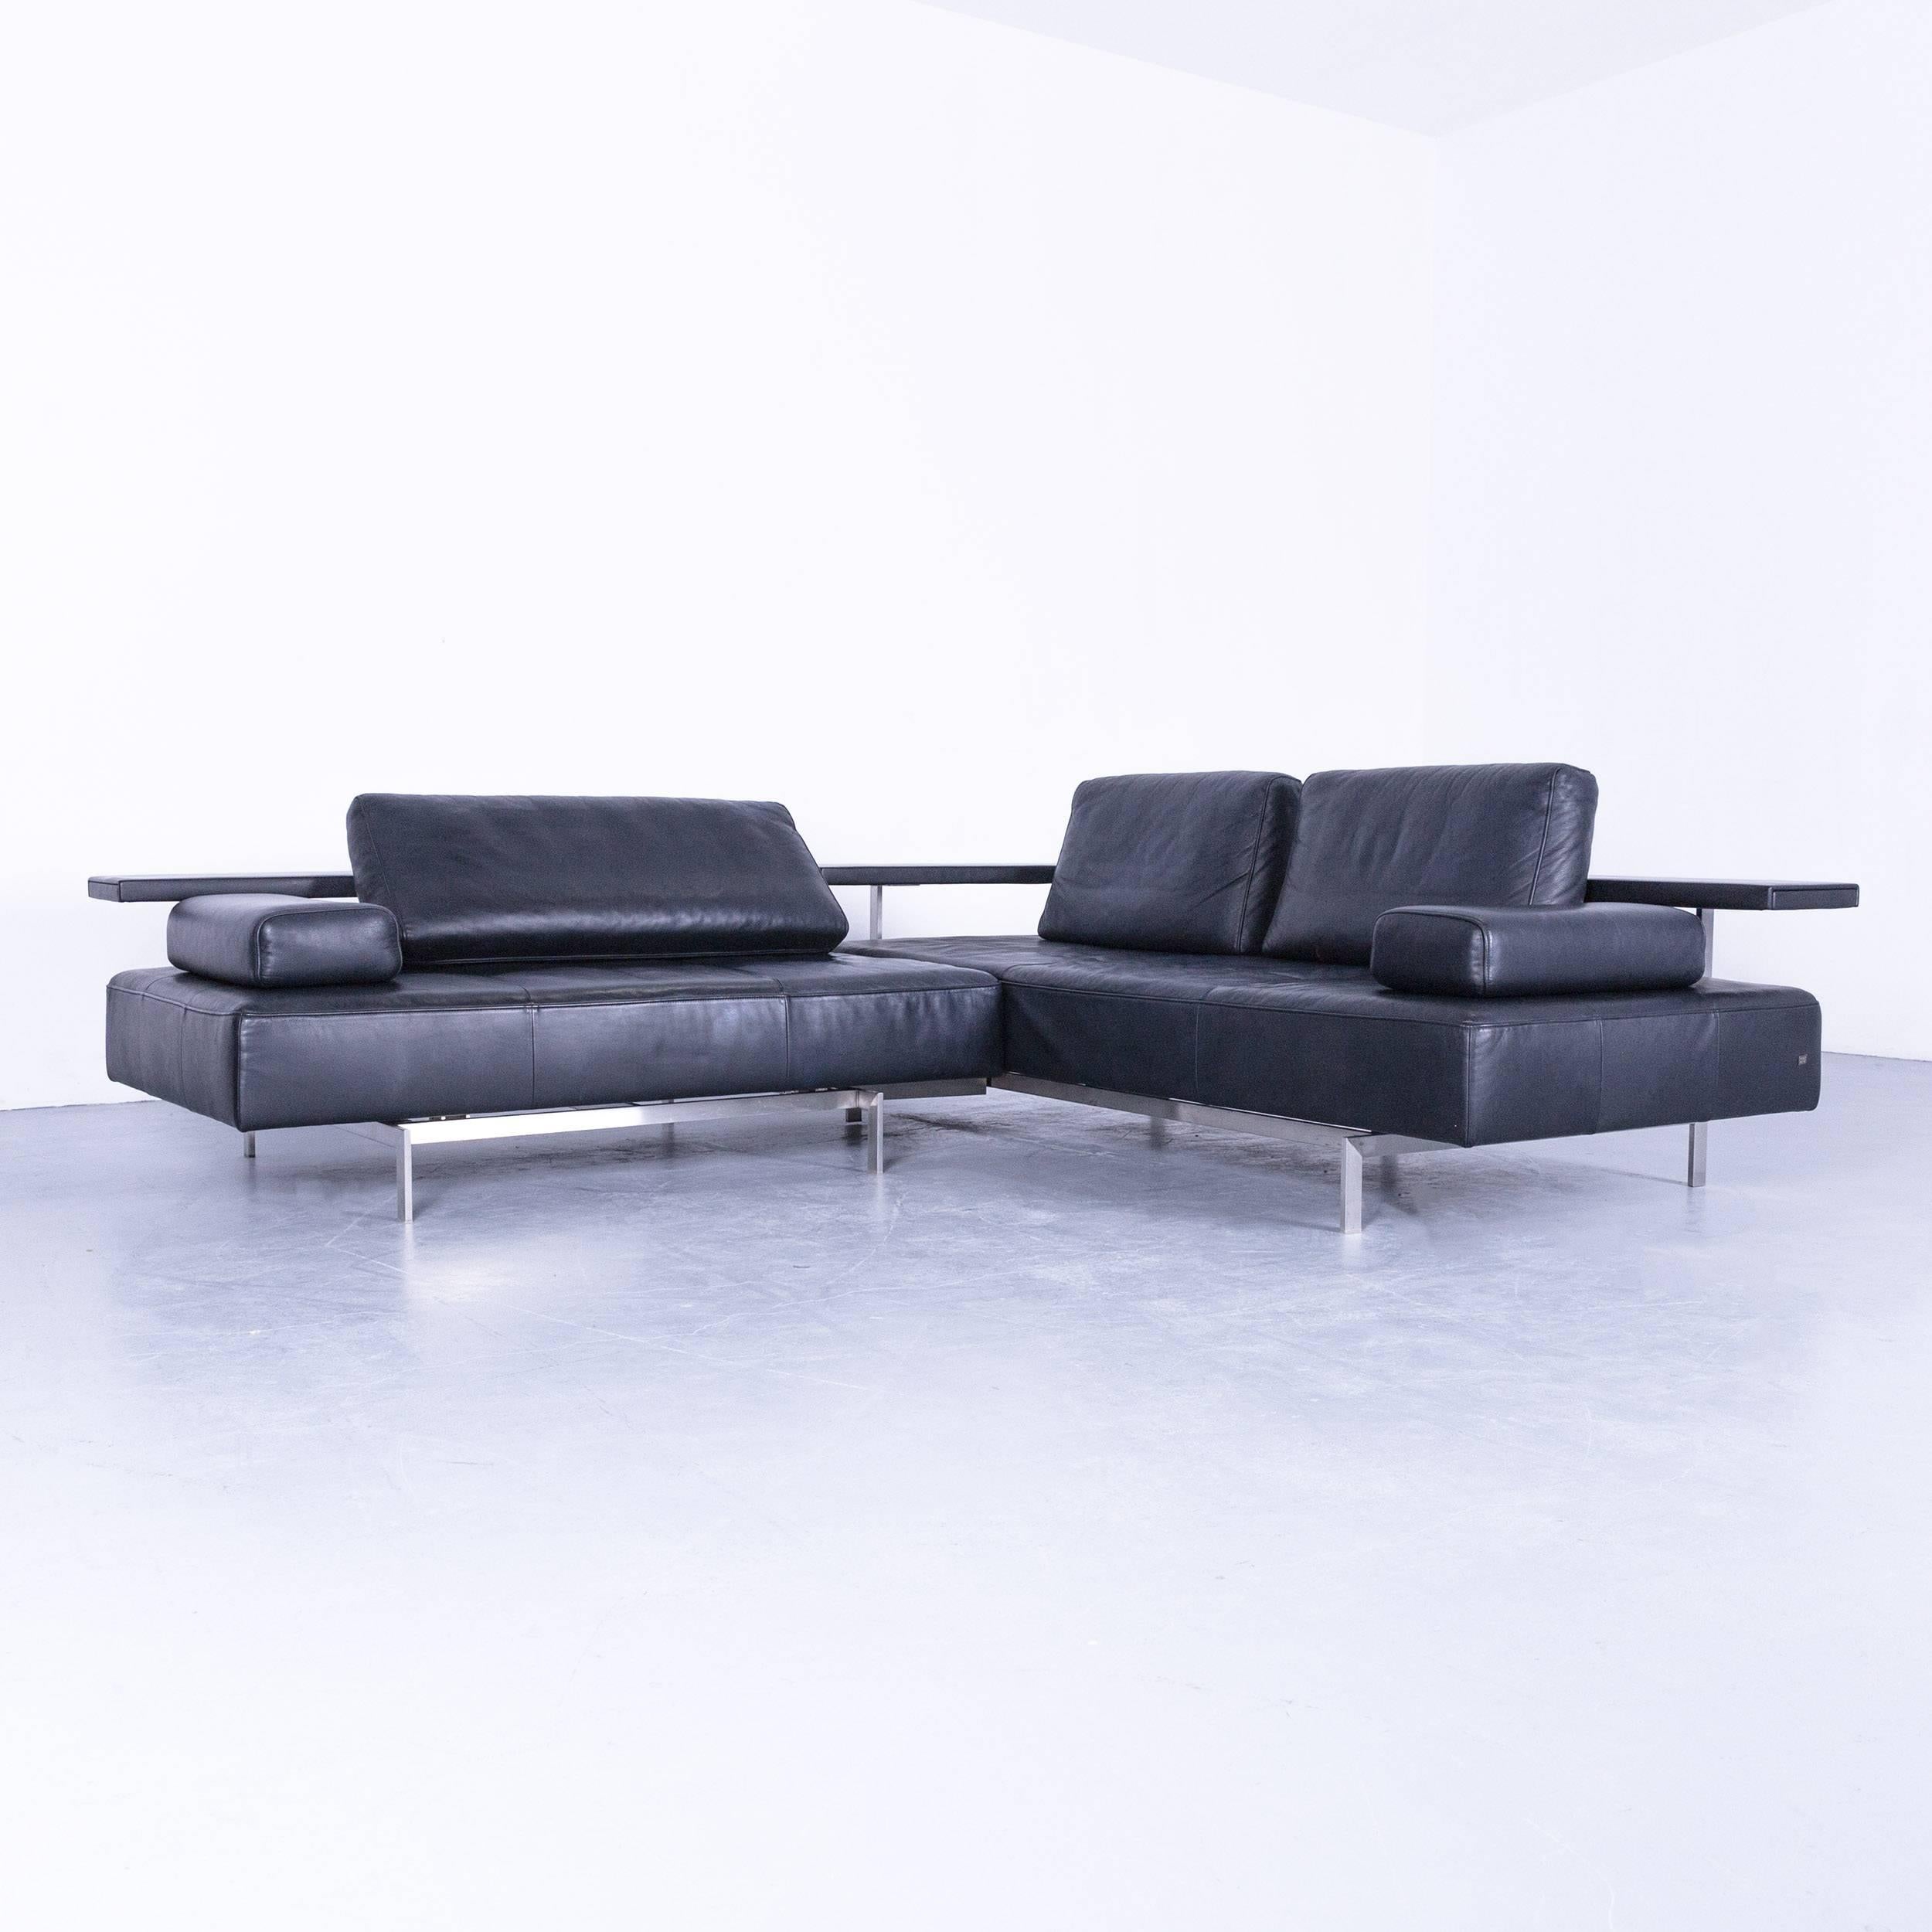 Rolf Benz Dono designer corner sofa with footstool in dark blue leather. Couch modern, in a minimalistic and modern design, made in Germany for pure comfort.